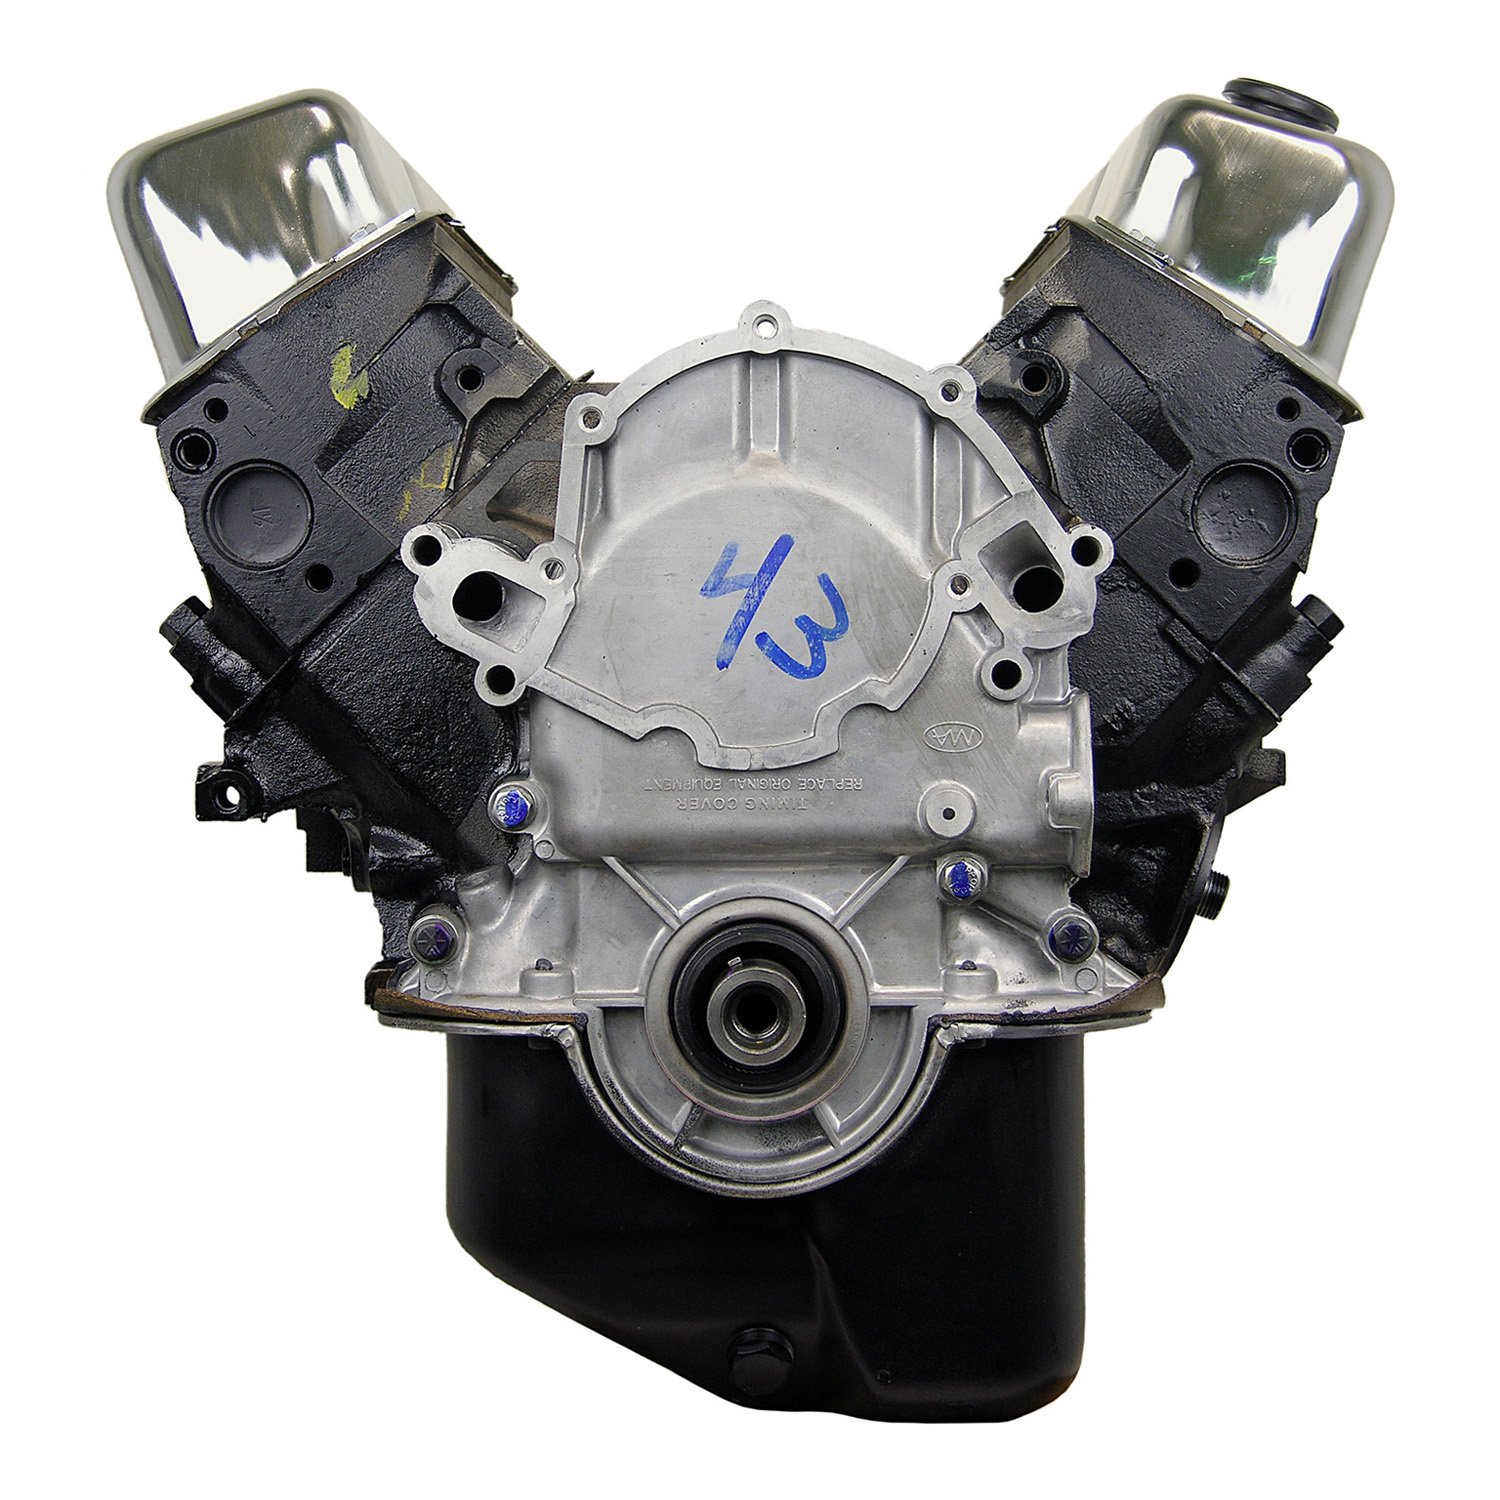 HP06 High Performance Crate Engine Small Block Ford 302ci / 300HP / 336TQ